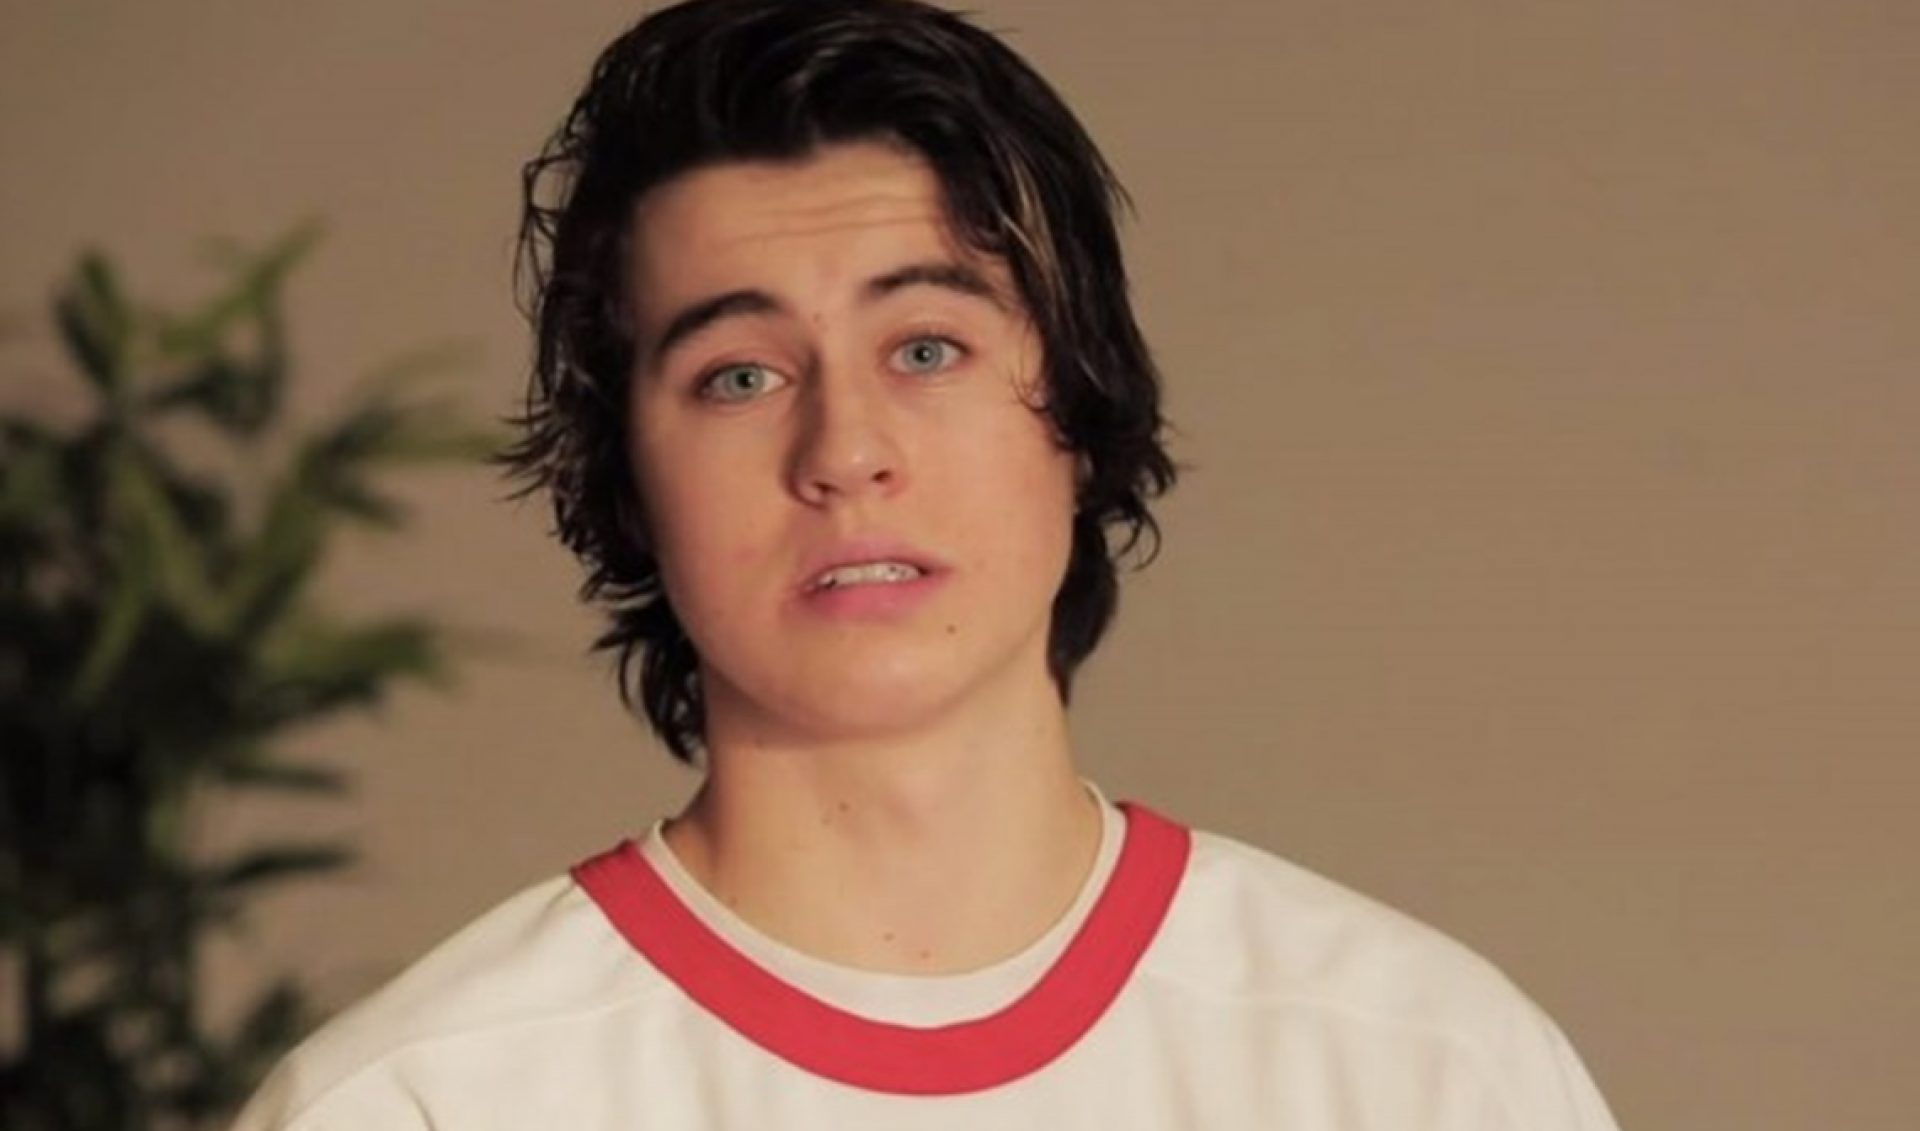 DigiTour Strikes Deal To Make “IRL” Events, Web Series With Nash Grier